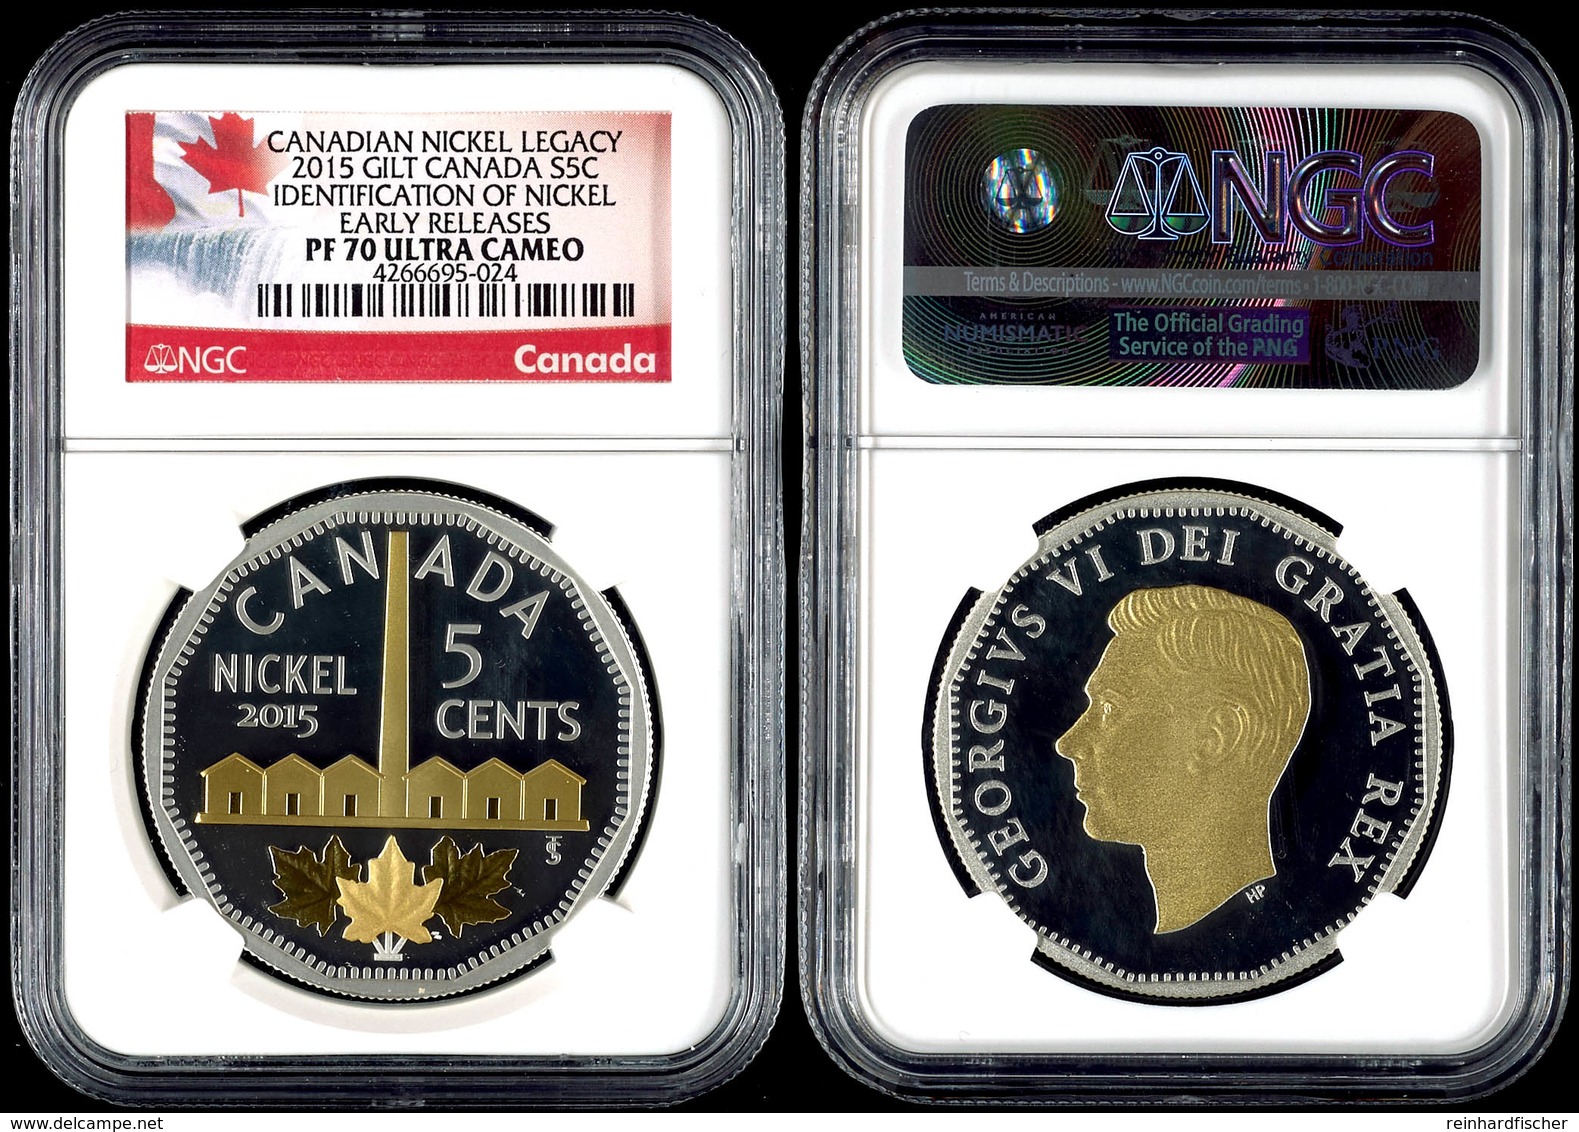 5 Cents, 2015, Canadian Nickel Legacy, In Slab Der NGC Mit Der Bewertung PF70 Ultra Cameo, Early Releases, Flag Label. - Canada